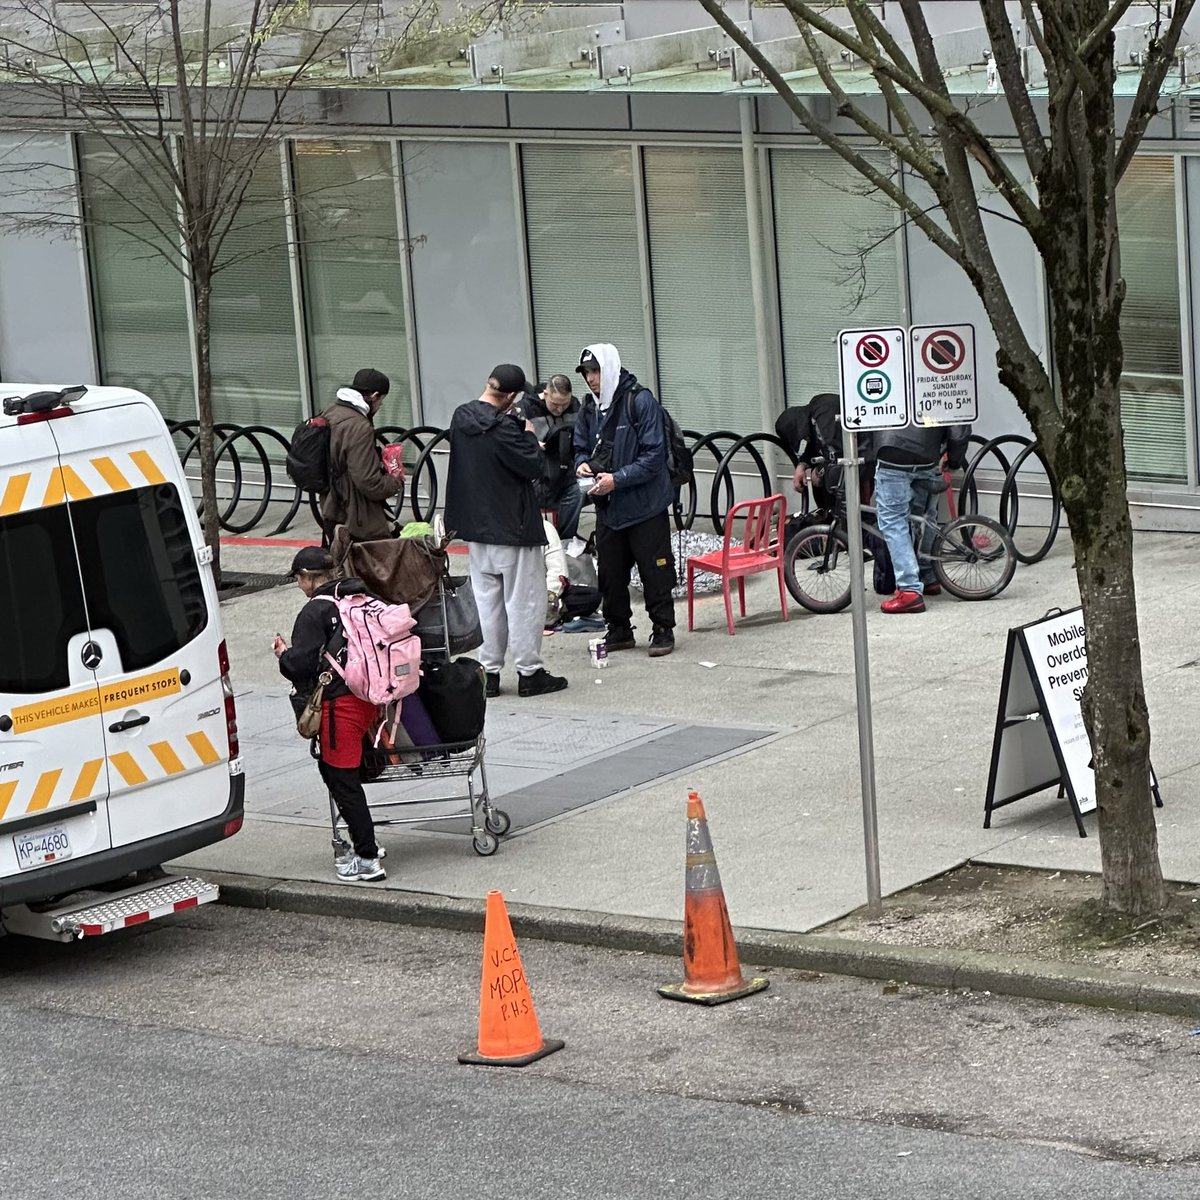 They were forced out of the OPS Downtown/Yaletown , now they set up shop right outside on the sidewalk? WTF?  @KenSimCity @PeterMeiszner @VancouverPD @VCHhealthcare 
@DeputyChow @PierrePoilievre 
@CityofVancouver @JohnRustad4BC